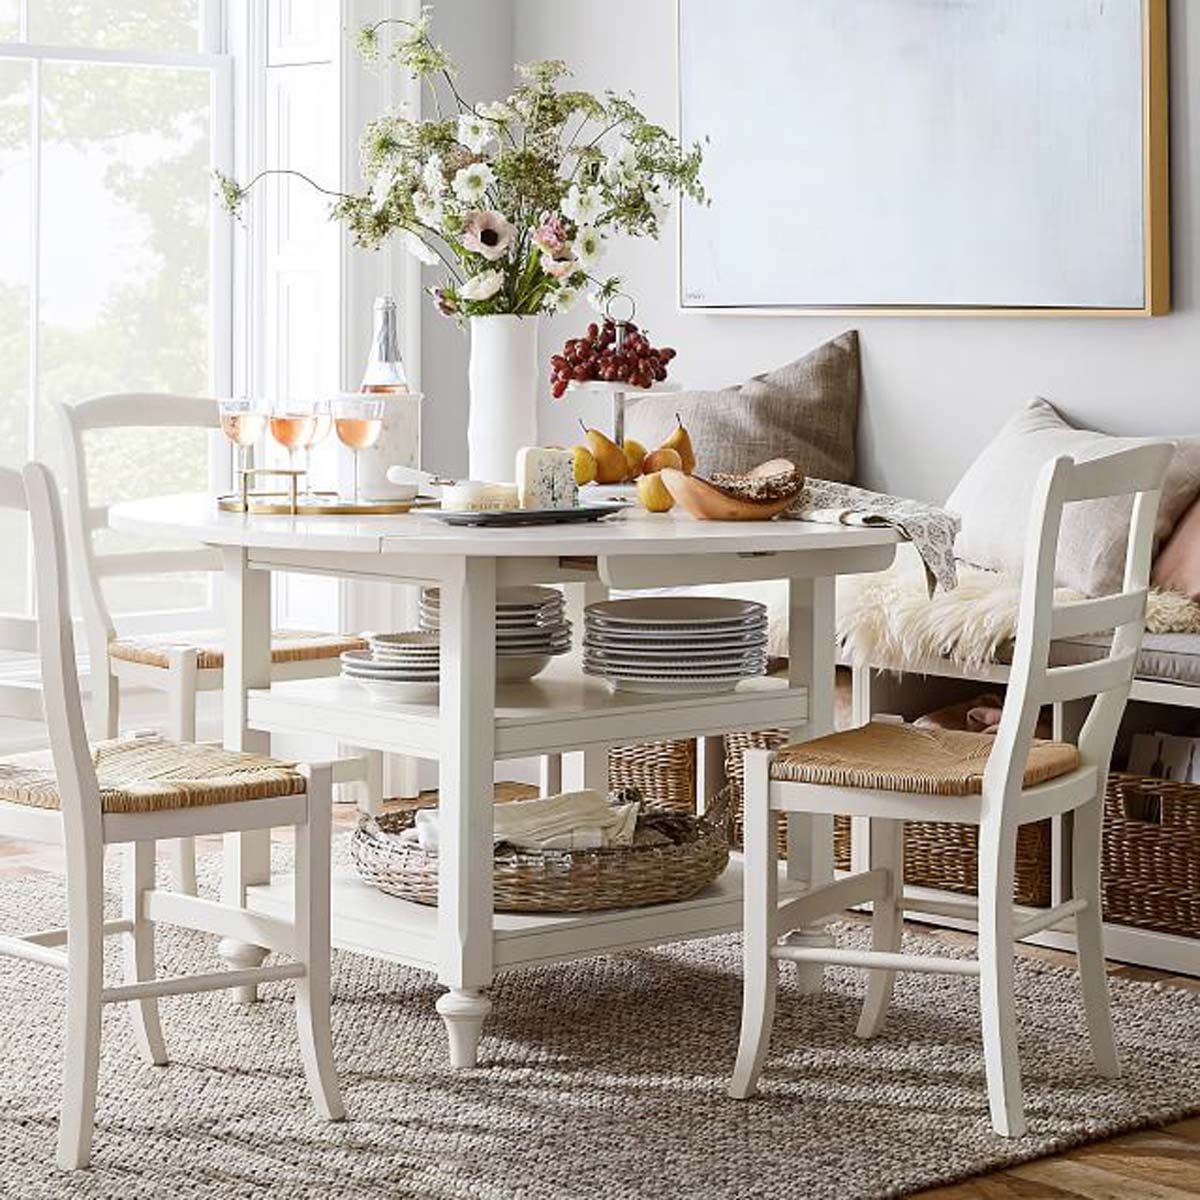 10 Best Kitchen and Dining Tables for Small Spaces